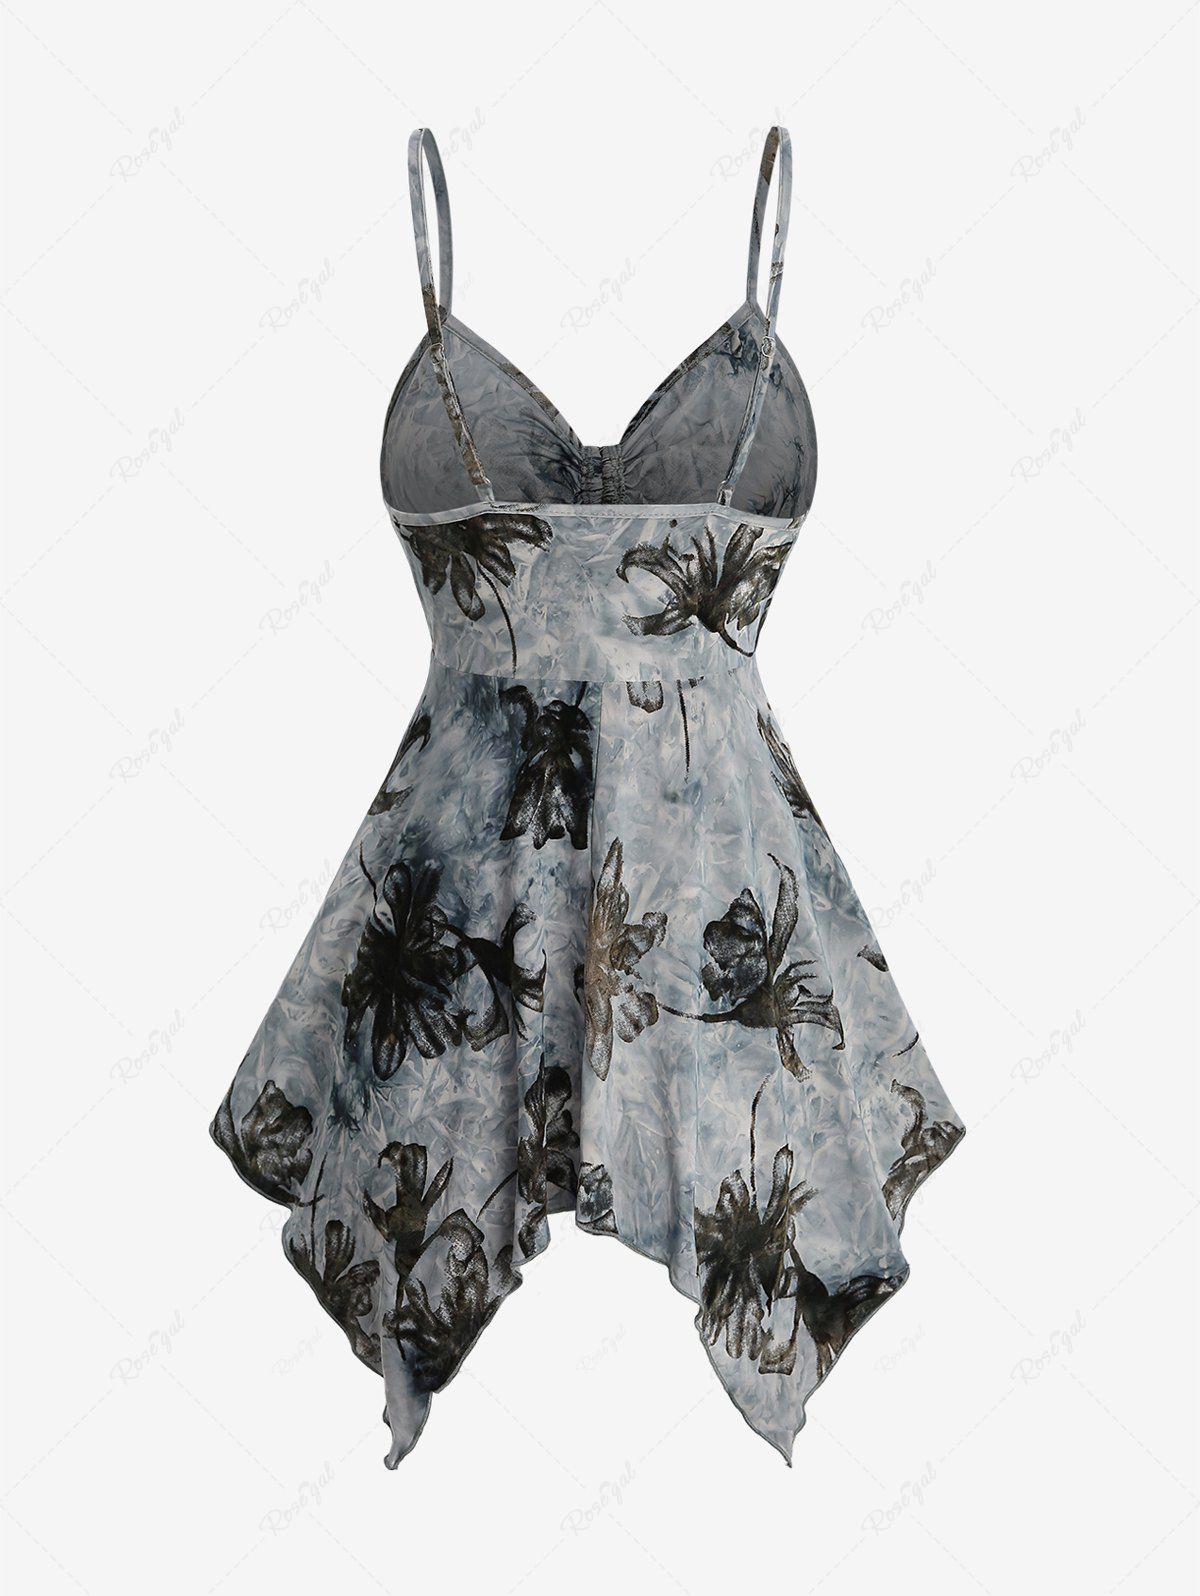 Gothic Floral Flocking Tie Dye Ombre Distressed Cinched Backless Asymmetric Handkerchief Cami Top